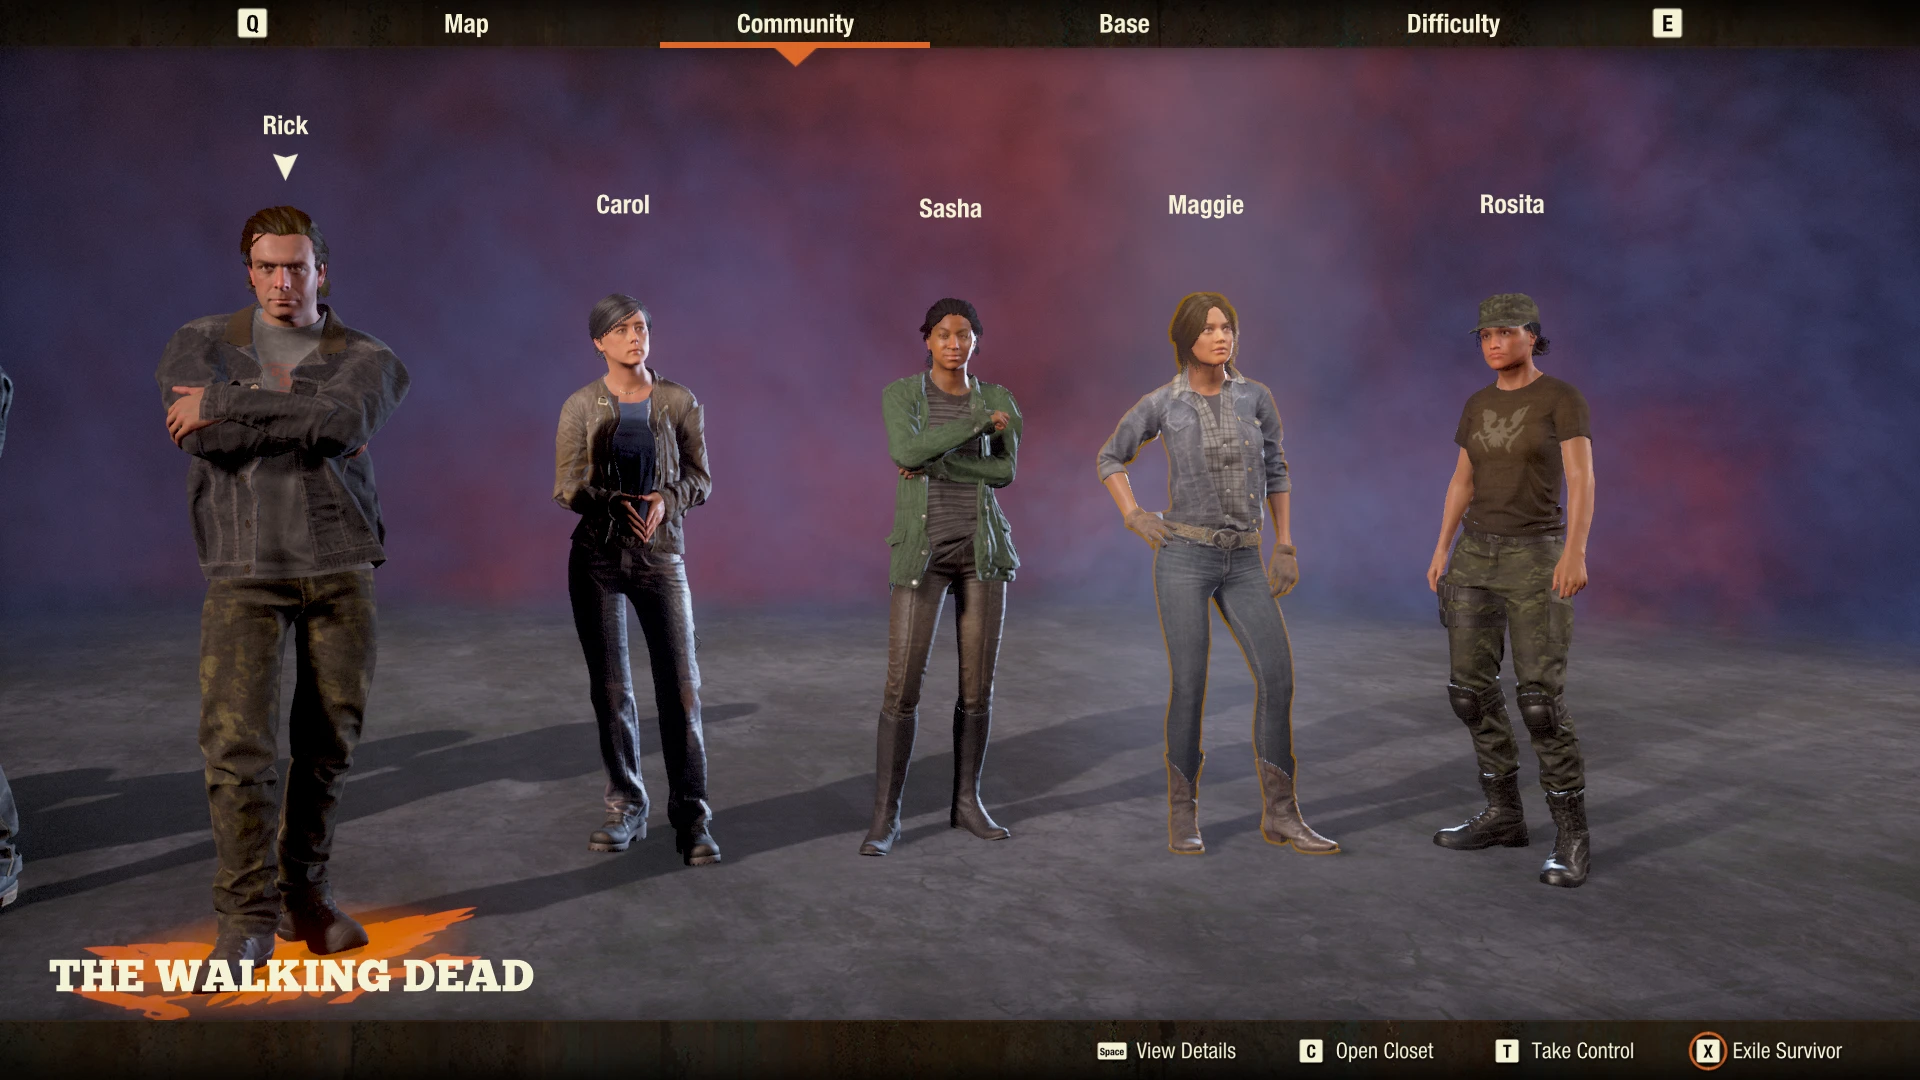 Cursed walking 1.19 2. State of Decay мод Ходячие мертвецы. State of Decay 2 Рик Граймс. State of Decay 2 персонажи алого когтя. State of Decay 2 одежда жилетка.